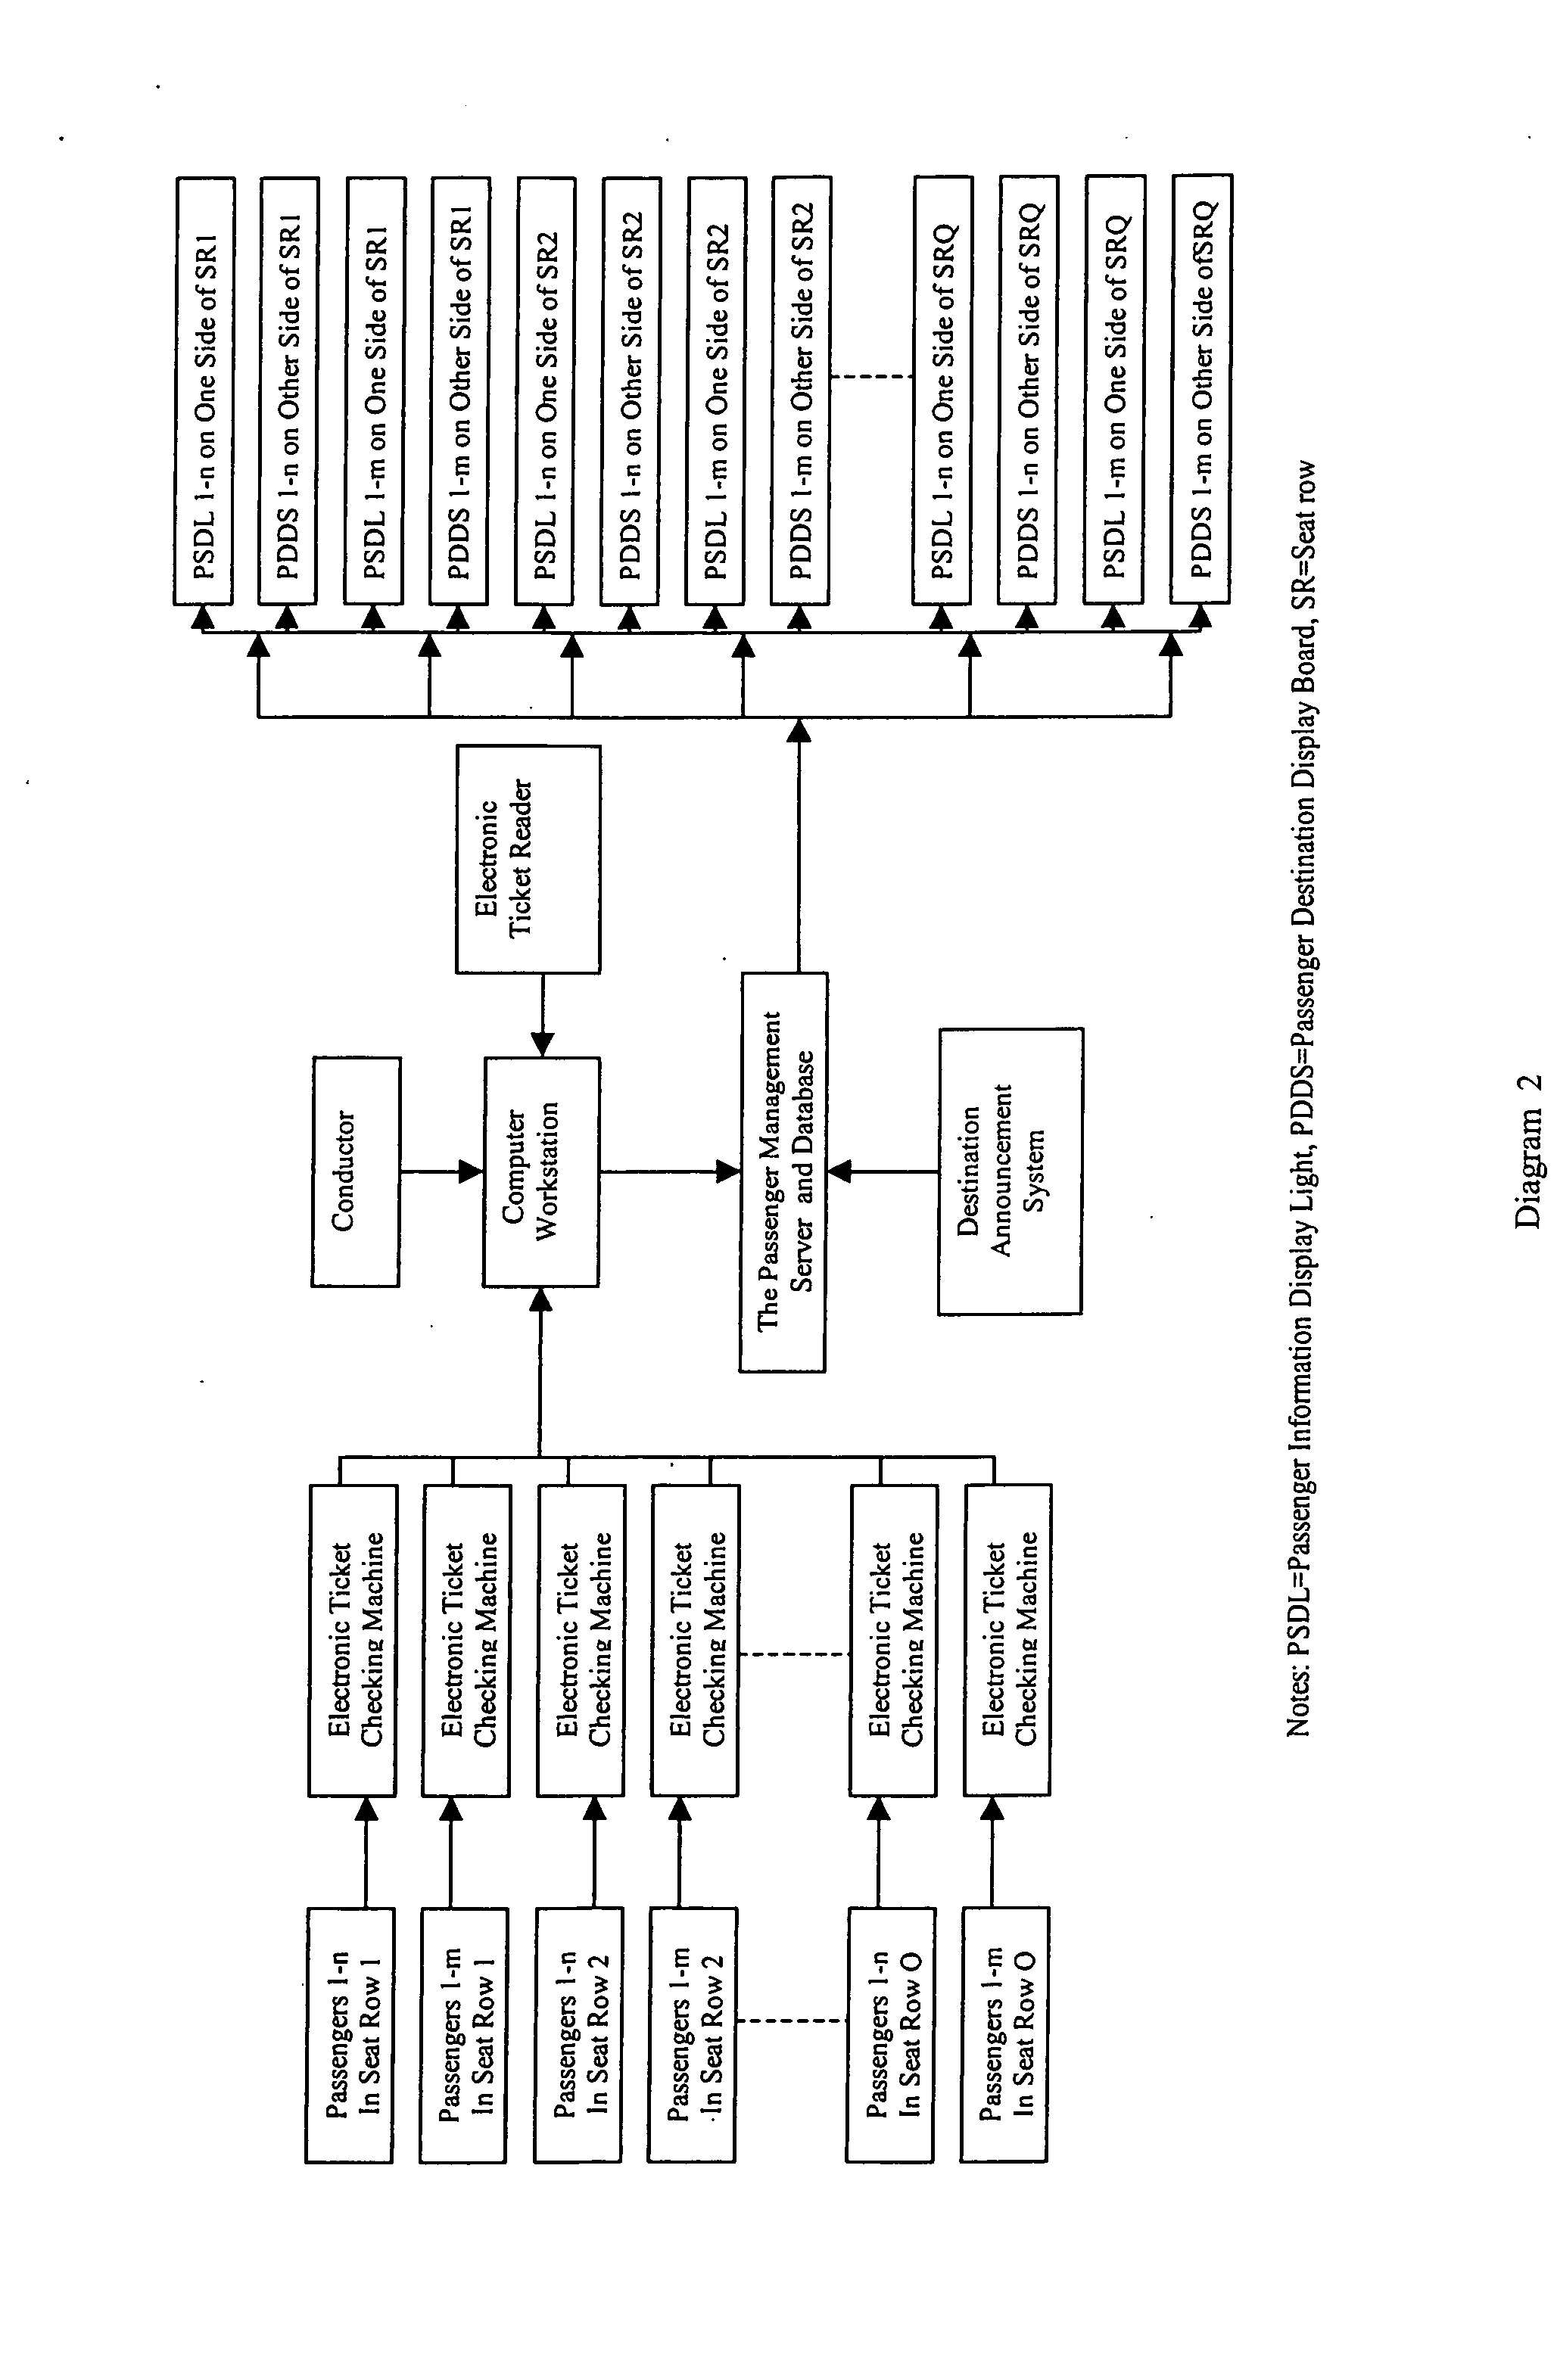 Electronic passenger management method and system in railroad passenger cars/long-distance buses